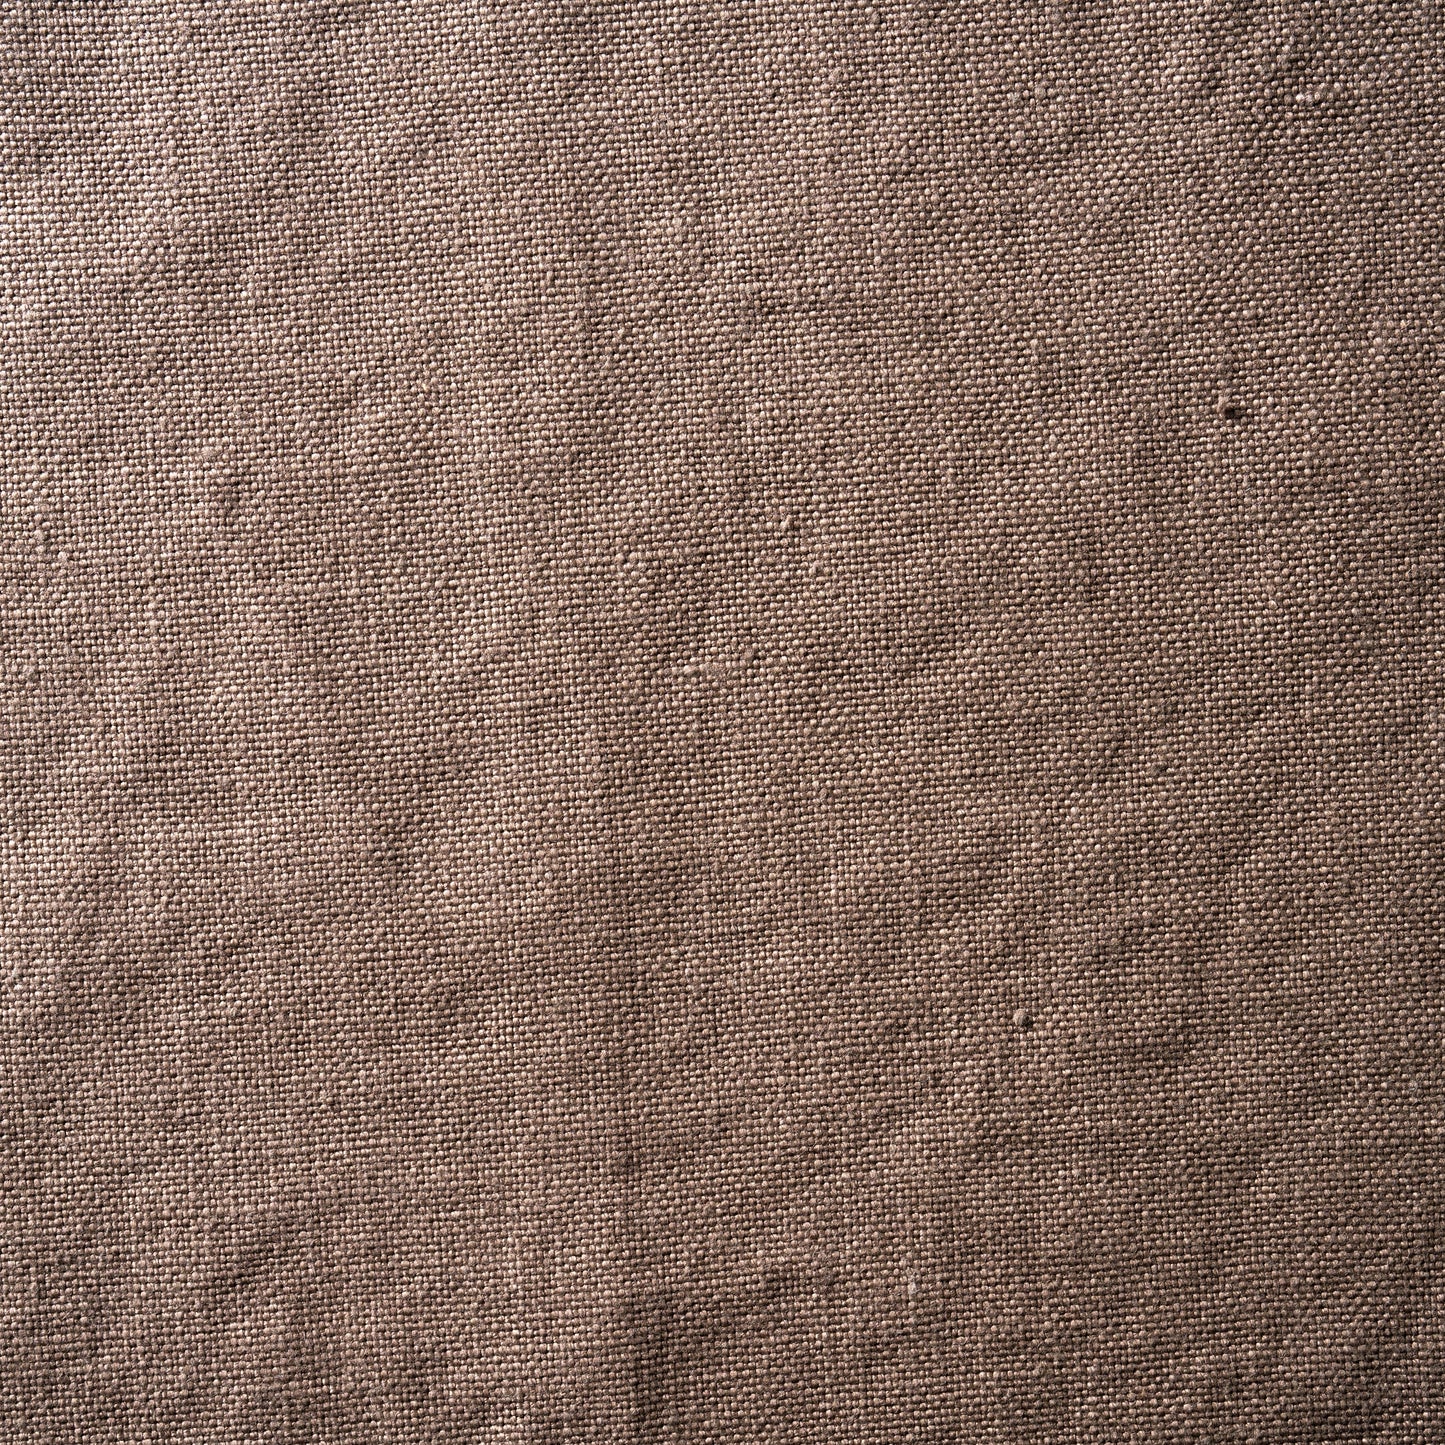 12 oz/sq yard 100% Upholstery/ Slipcover Weight Linen in Bark Swatch